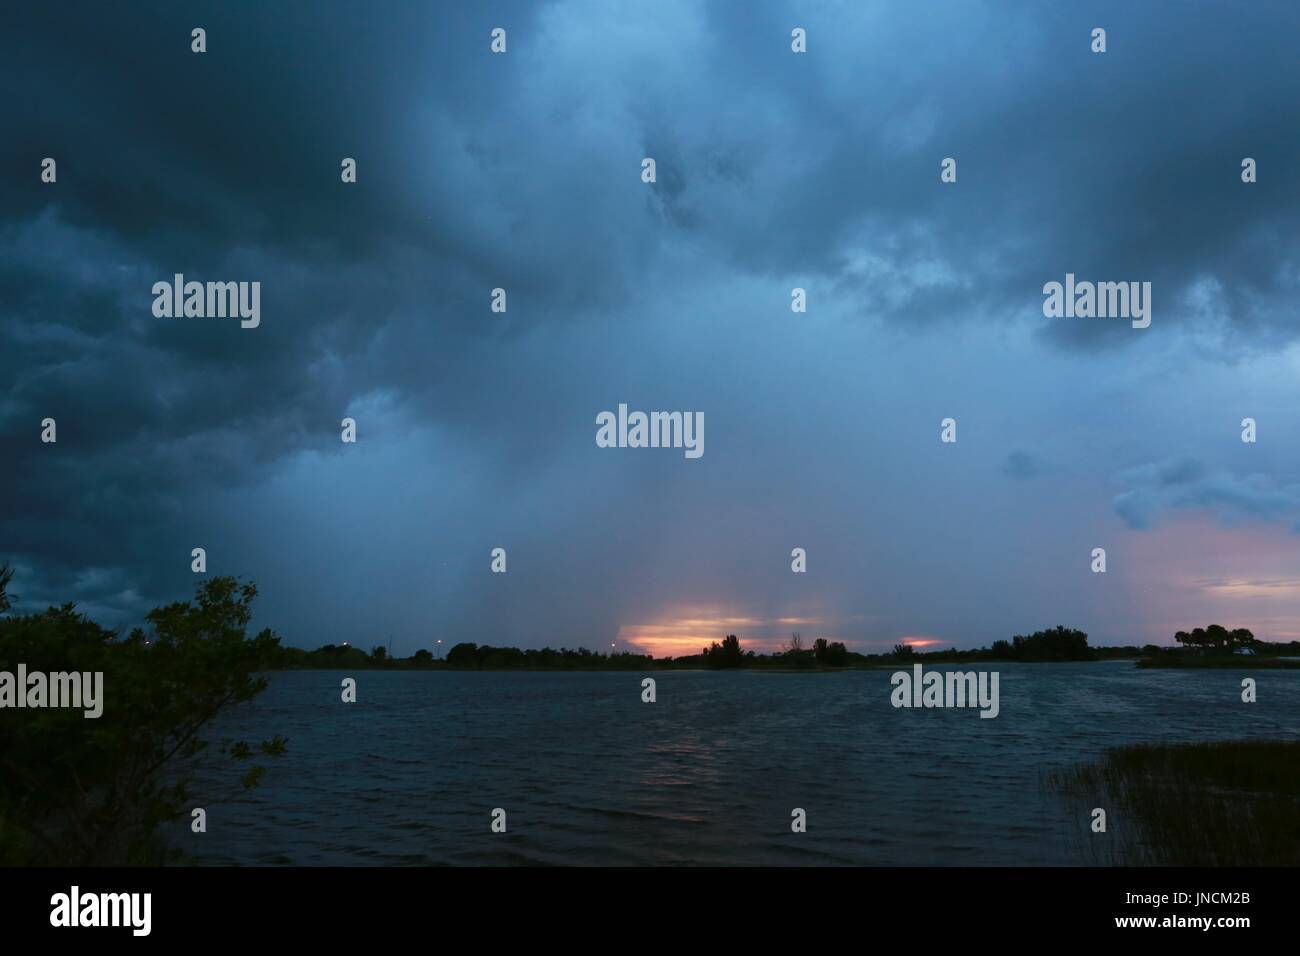 Huge Bank of Rain Clouds Approaching Over Lake at Sunset Stock Photo